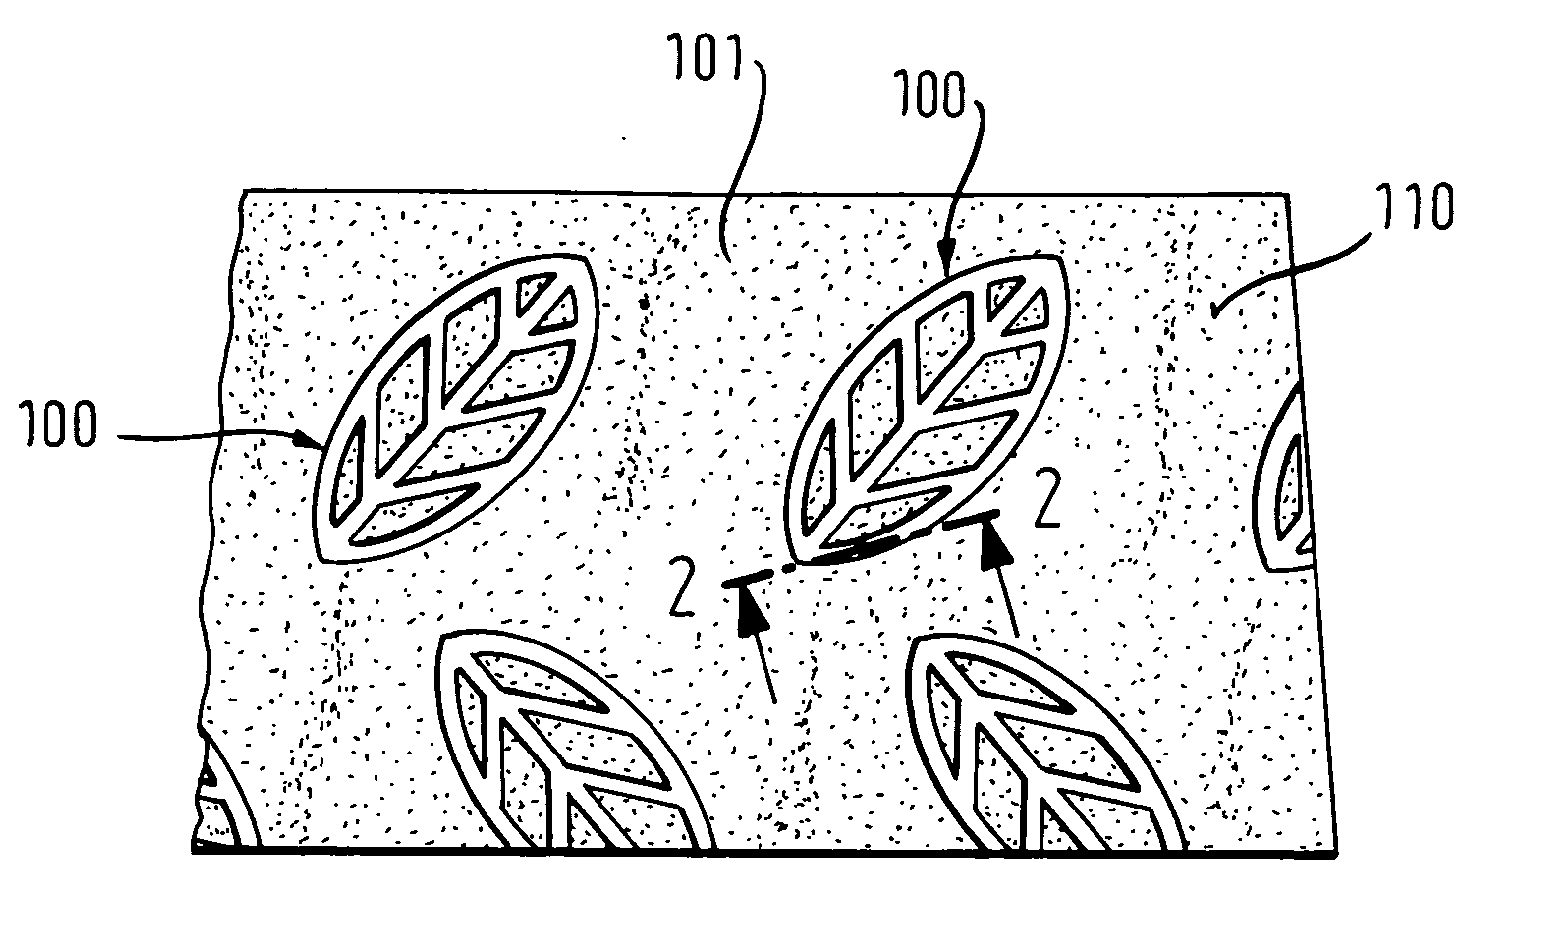 Hygiene or wiping product comprising at least one patterned ply and method for patterning the ply